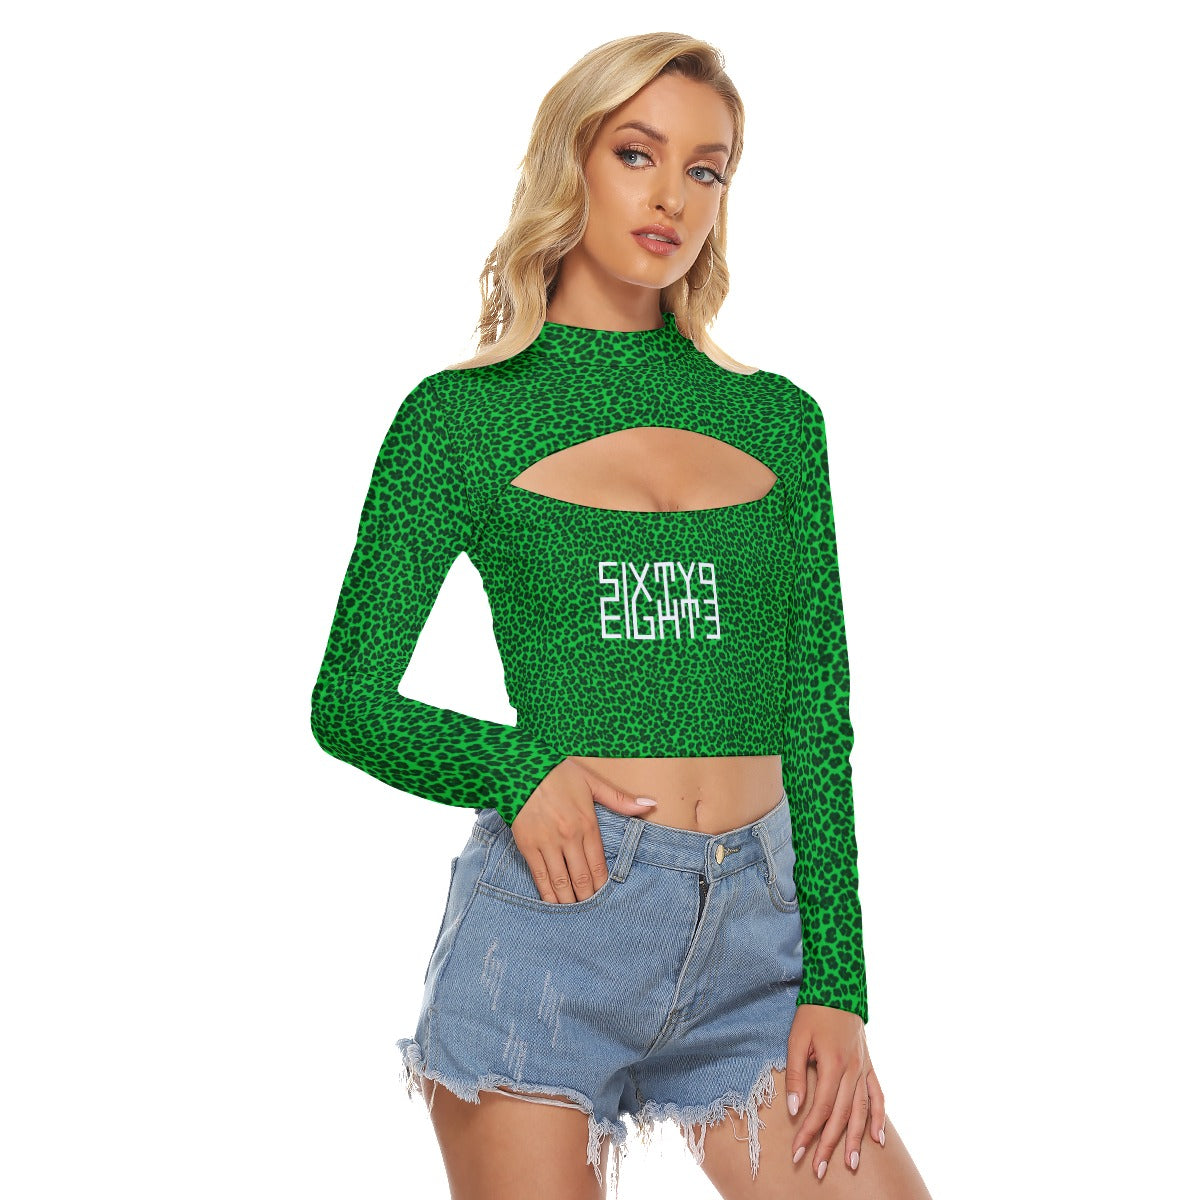 Sixty Eight 93 Logo White Cheetah Lime Green Women's Hollow Chest Keyhole Tight Crop Top